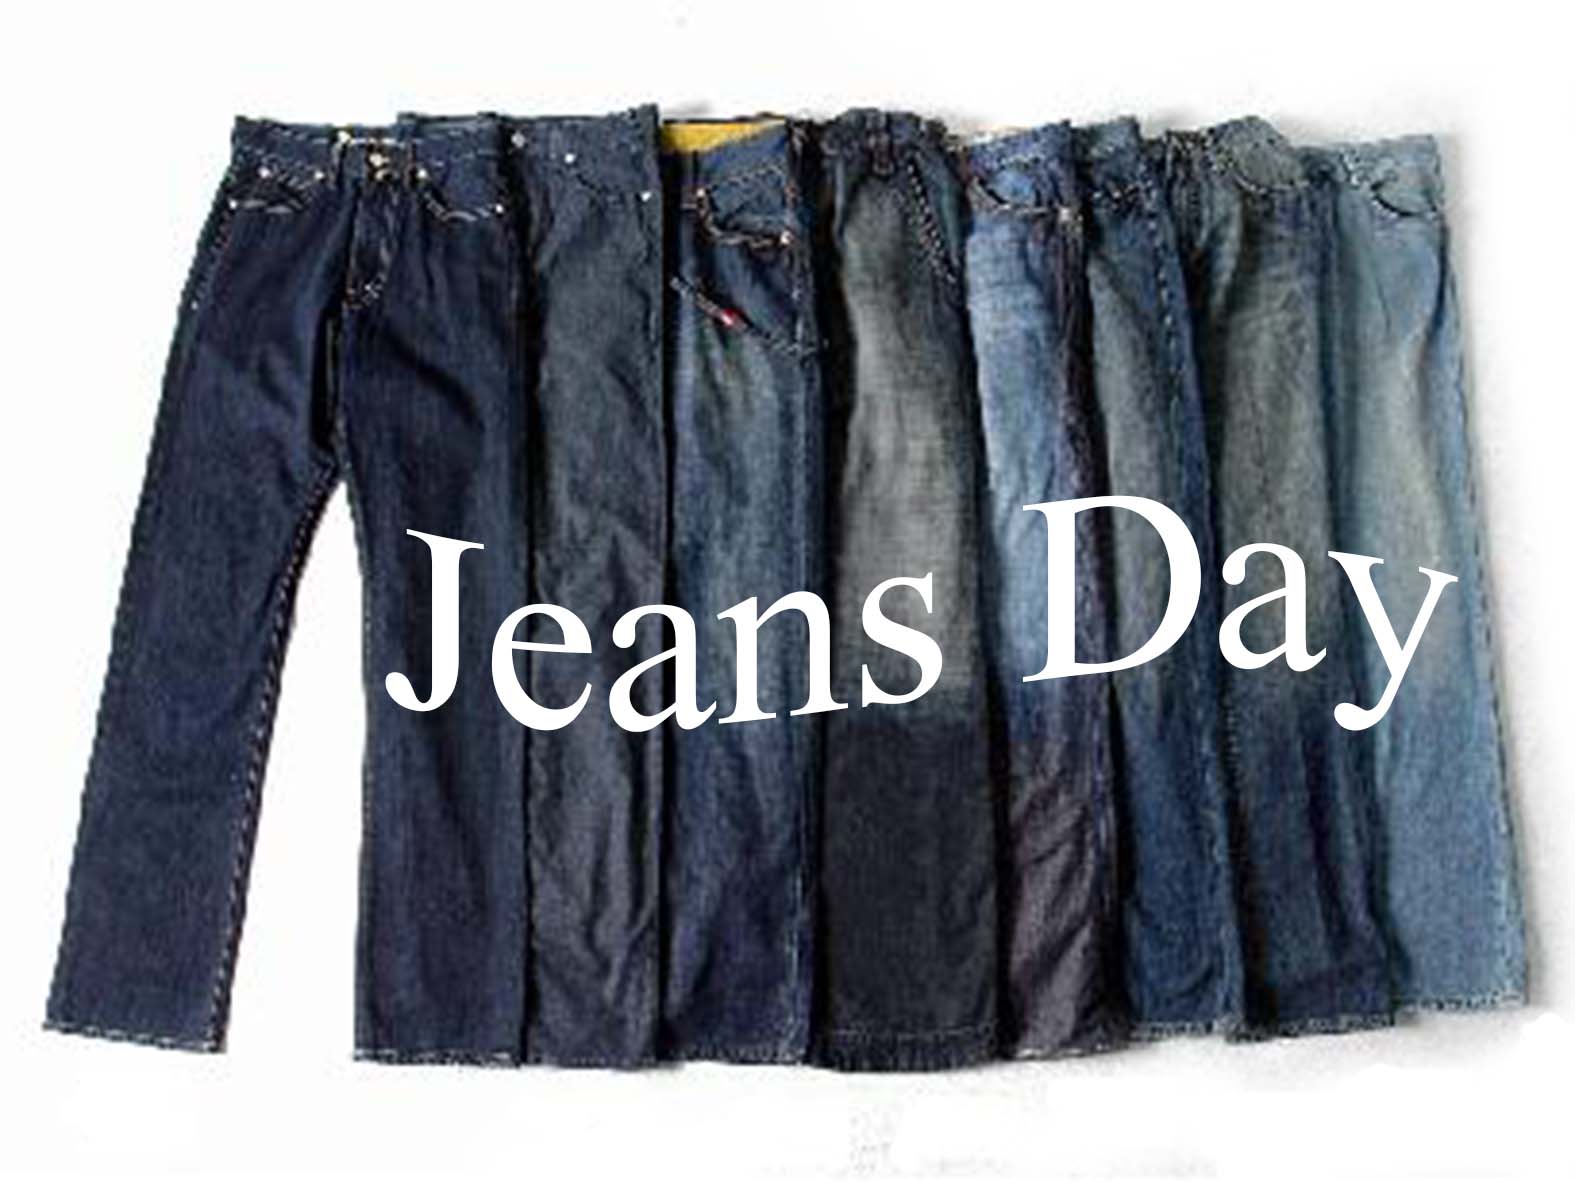 Jeans+Day+at+Work Jeans Day At Work Httpclothing ...